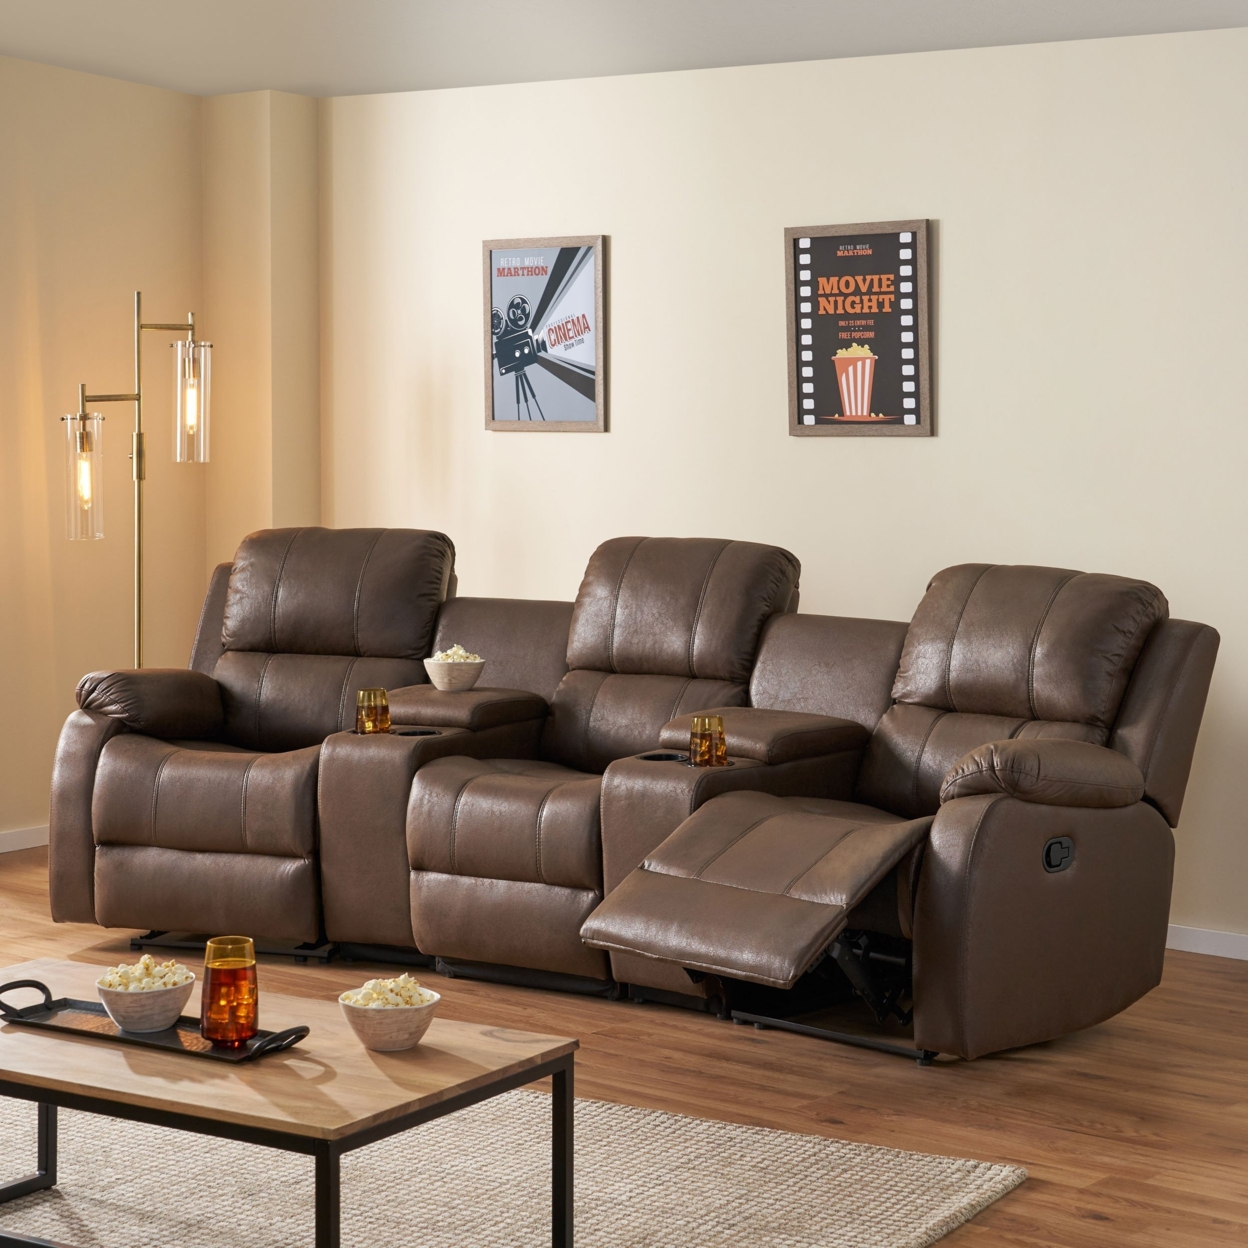 Lunsford Contemporary Upholstered Theater Seating Reclining Sofa - Black/brown